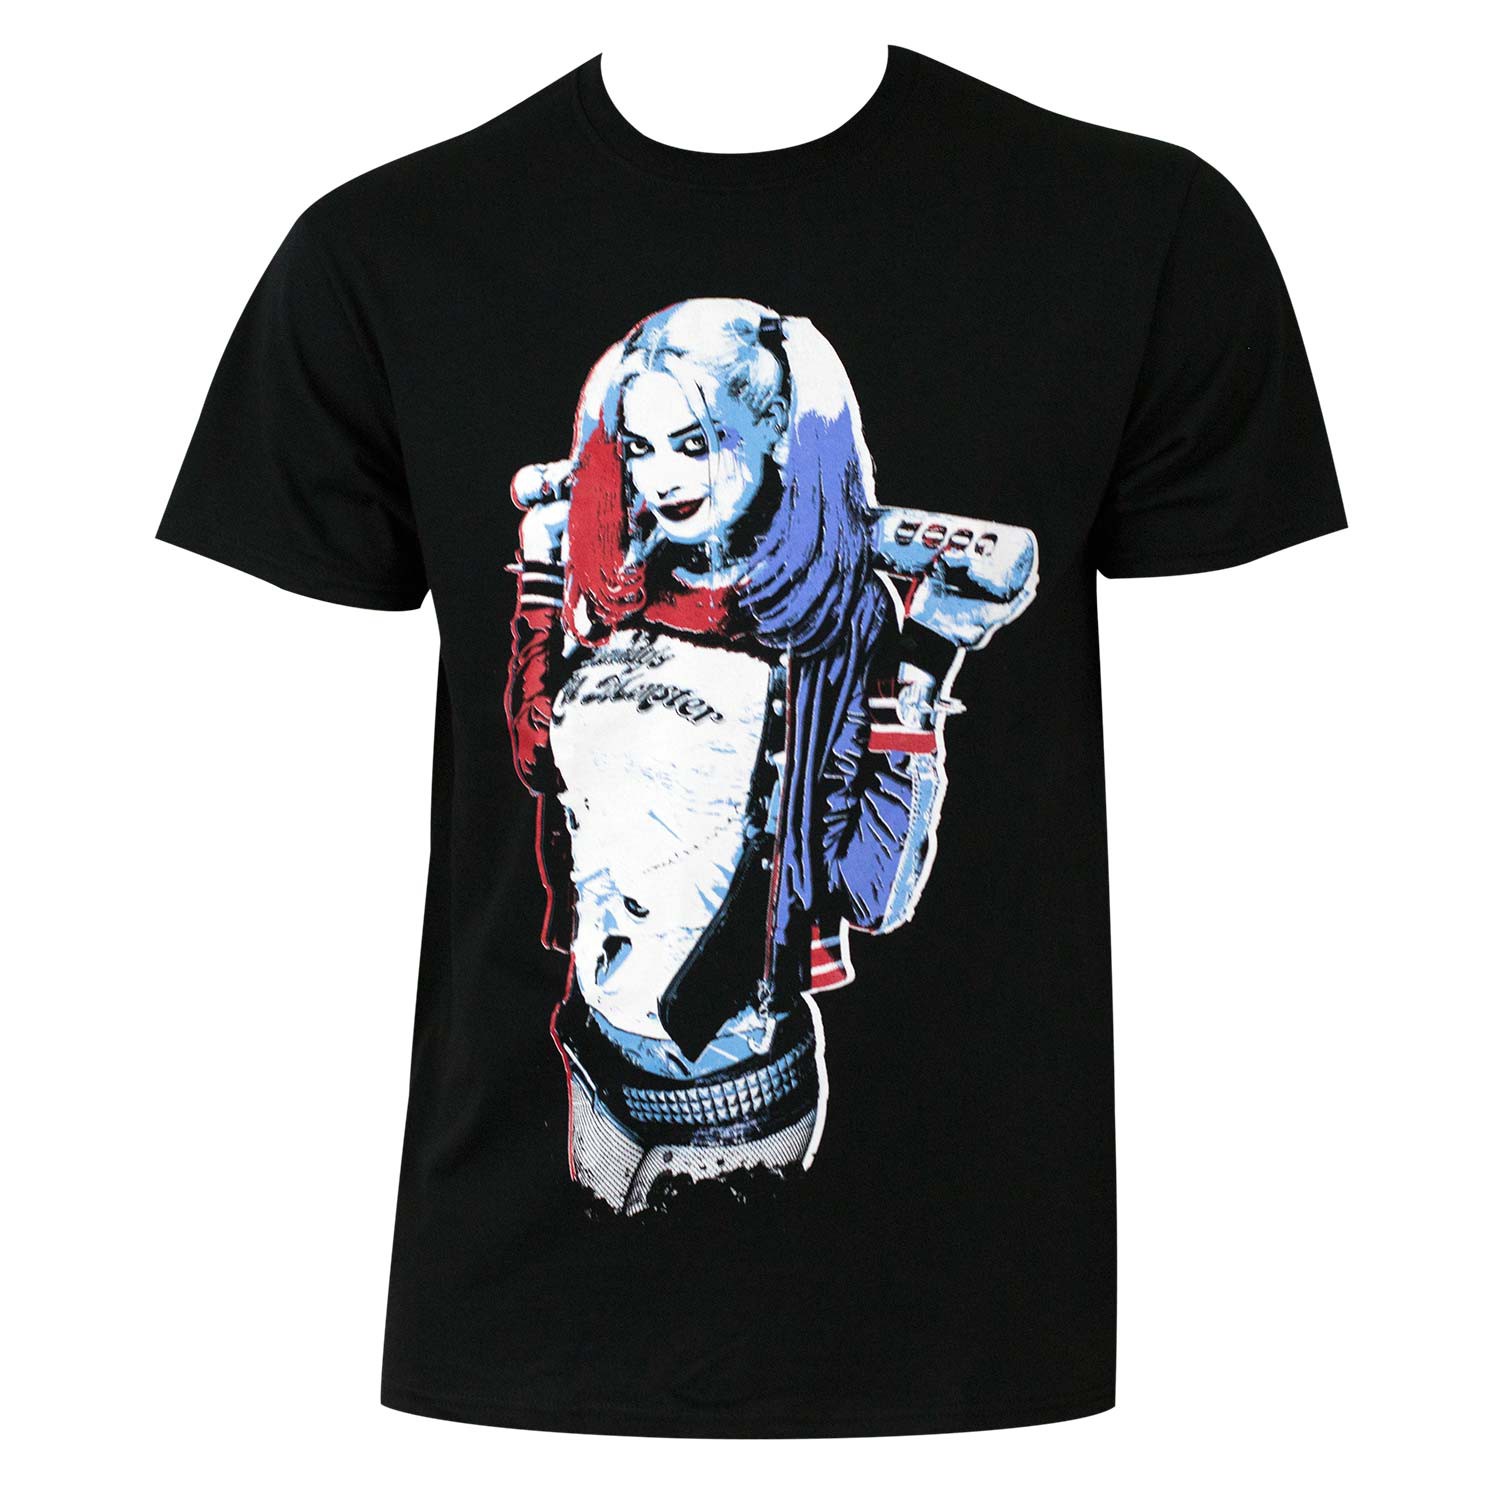 Suicide Squad Harley Quinn Queen Pose Tee Shirt